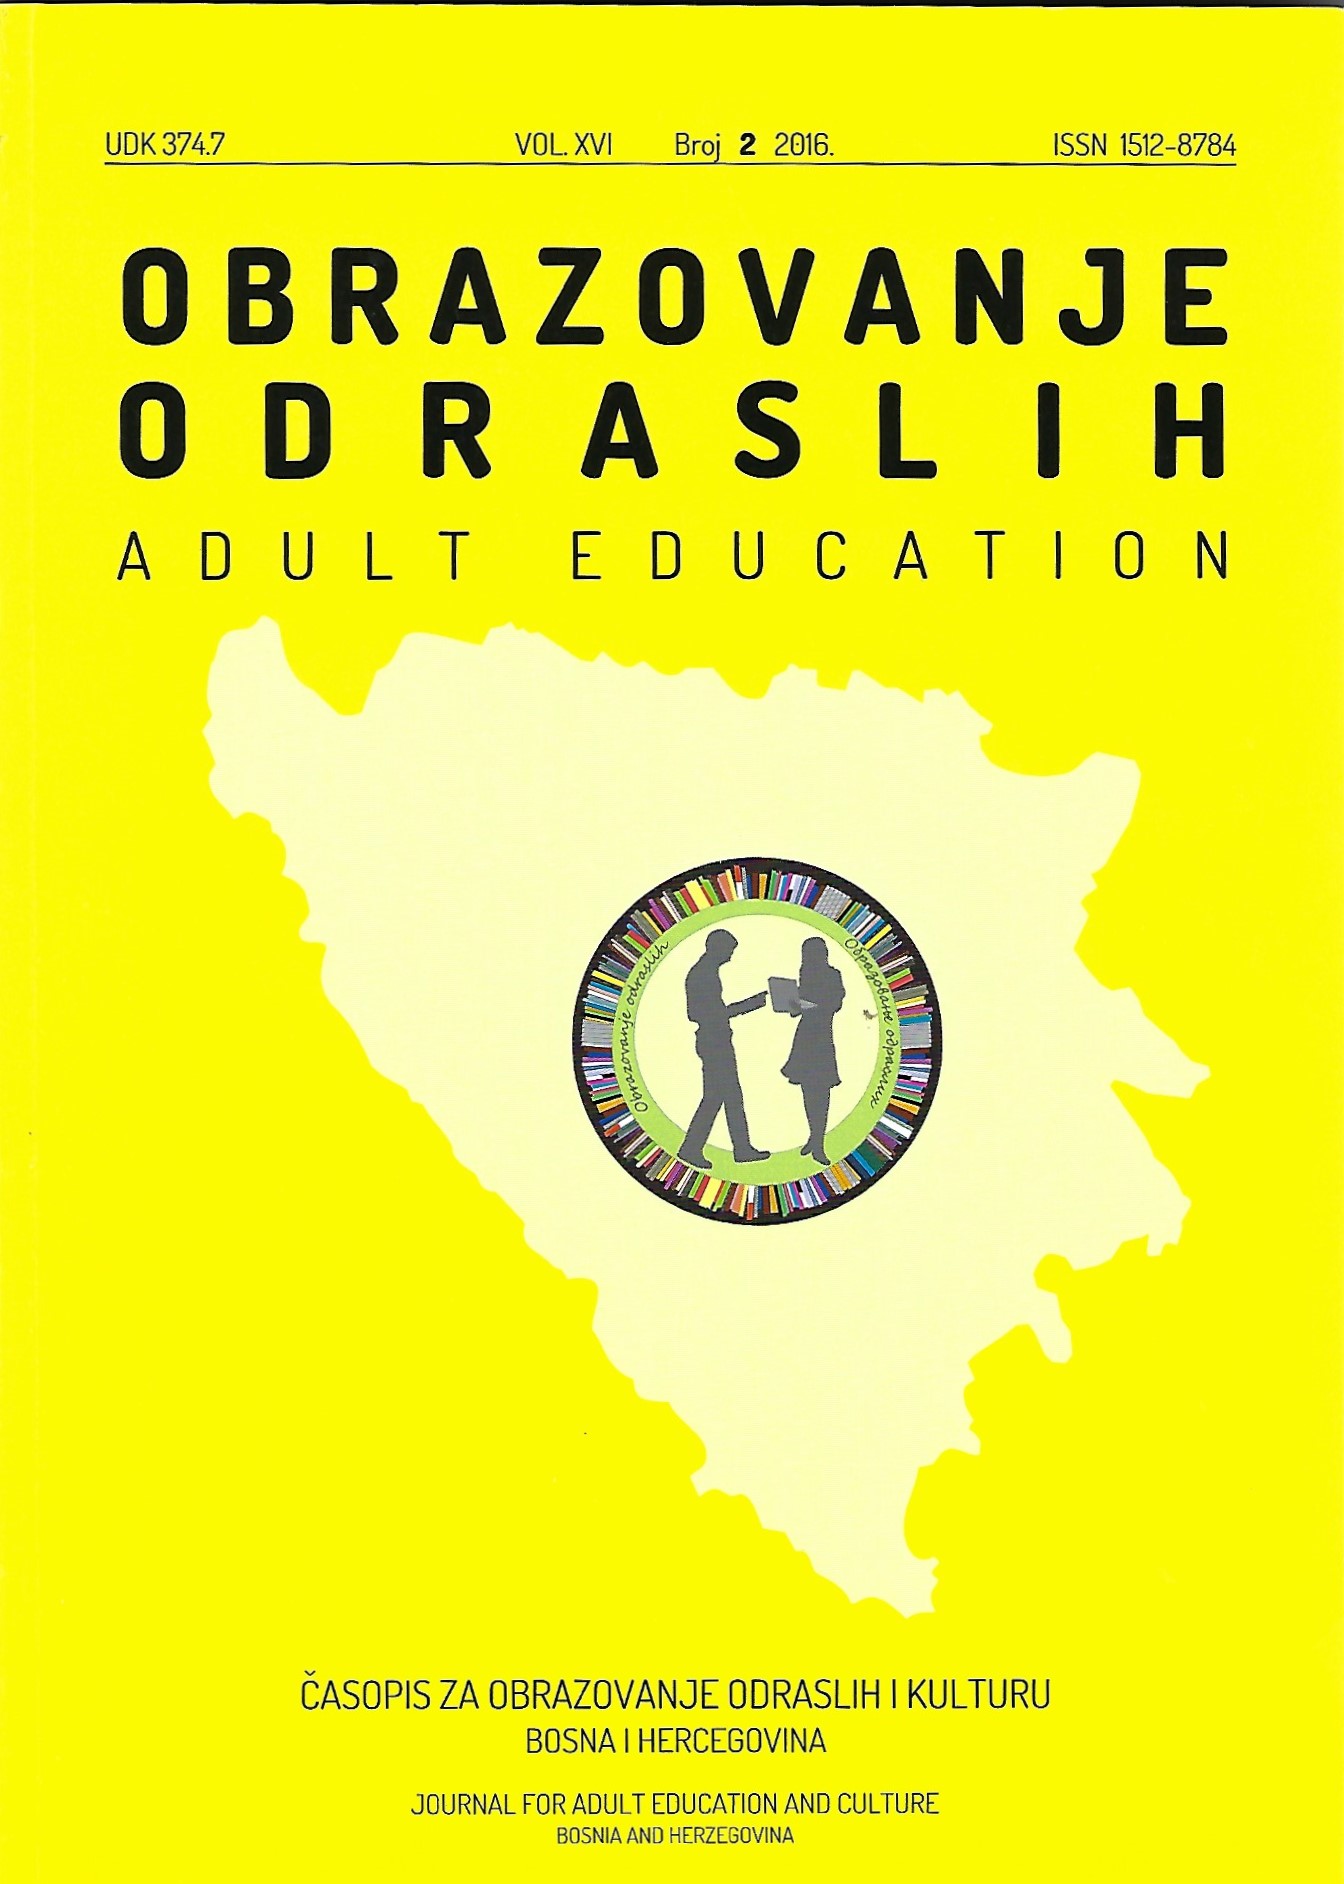 Euro-Atlantic integration and modern challenges in development policy of public communication in Bosnia and Herzegovina Cover Image